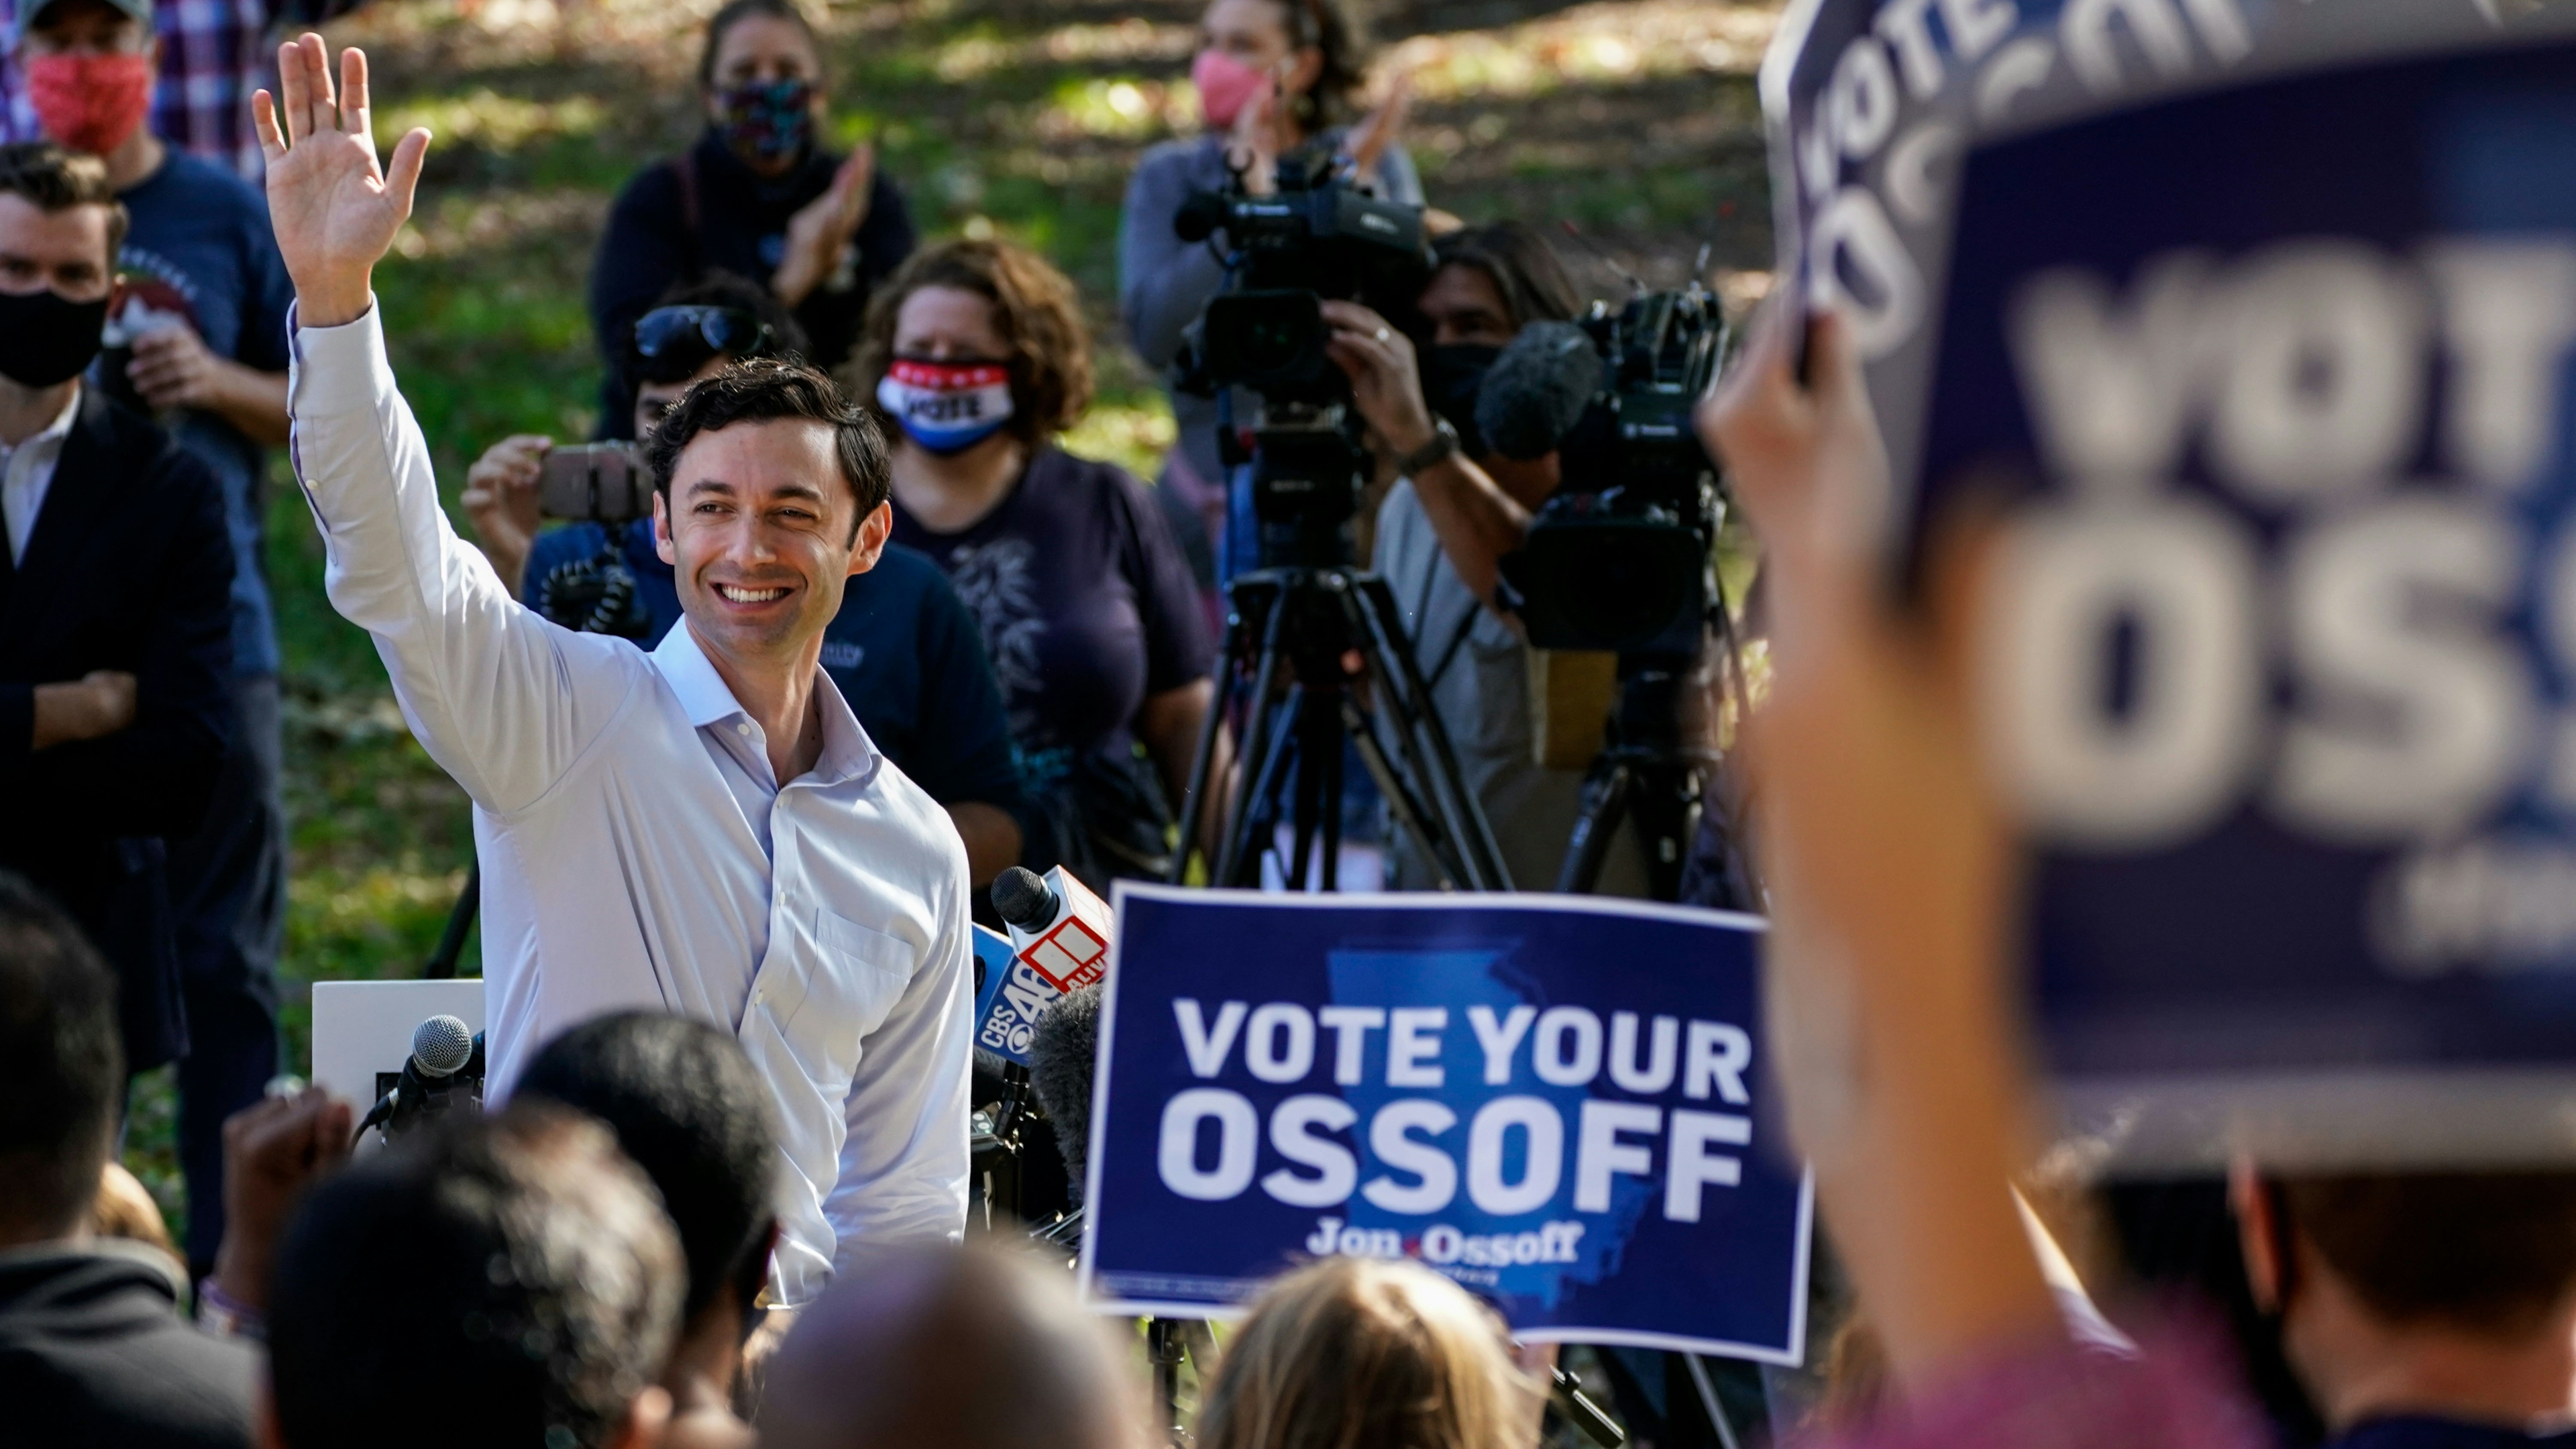 Jon Ossoff holds a campaign event at Grant Park on Friday, Nov. 6, 2020 in Atlanta, GA.